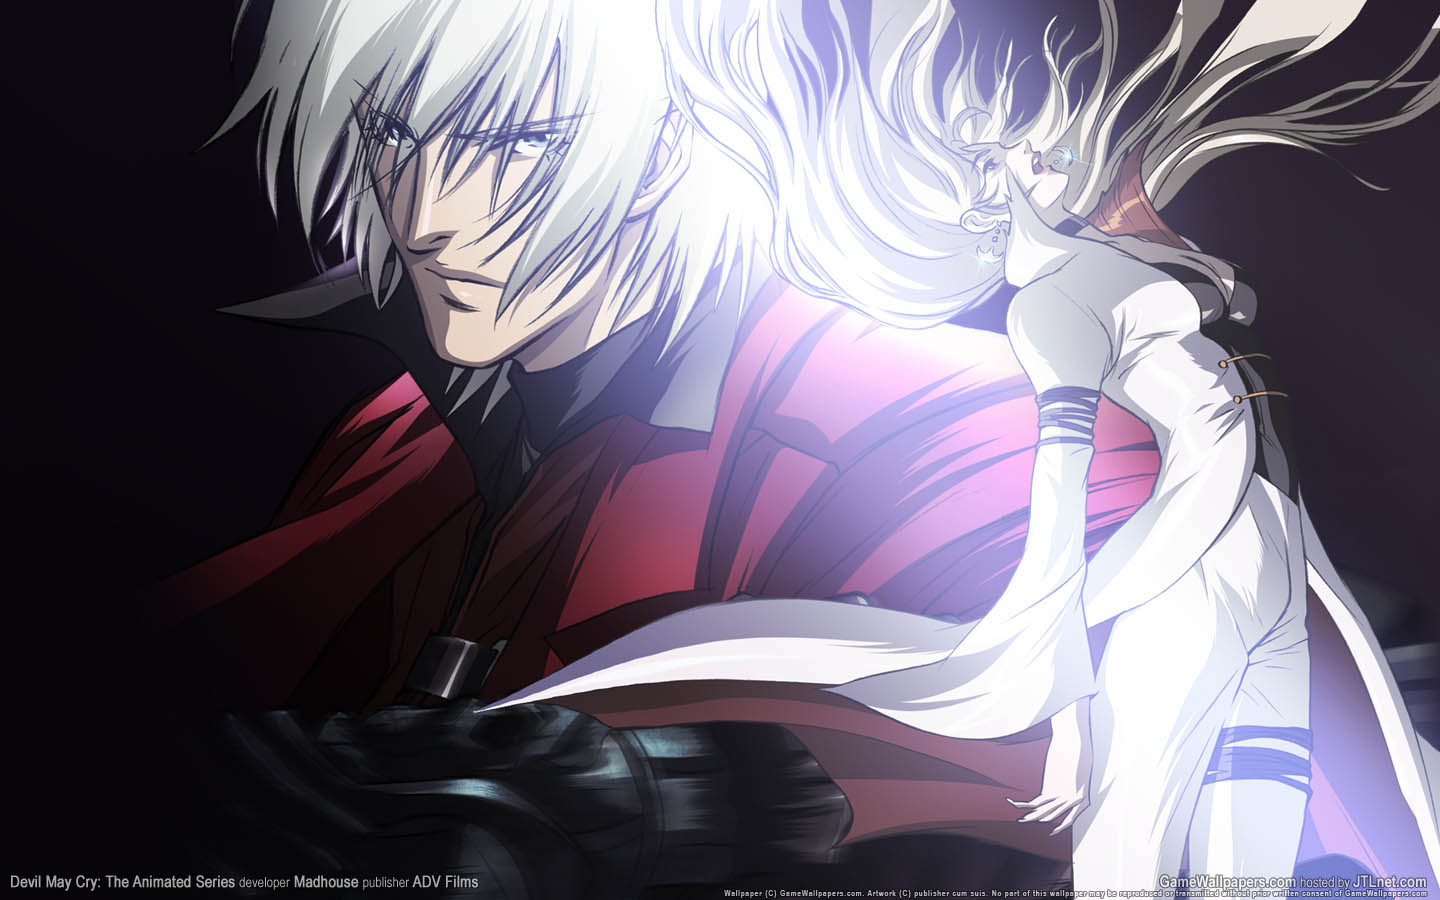 Devil May Cry: The Animated Series fond d'cran 02 1440x900